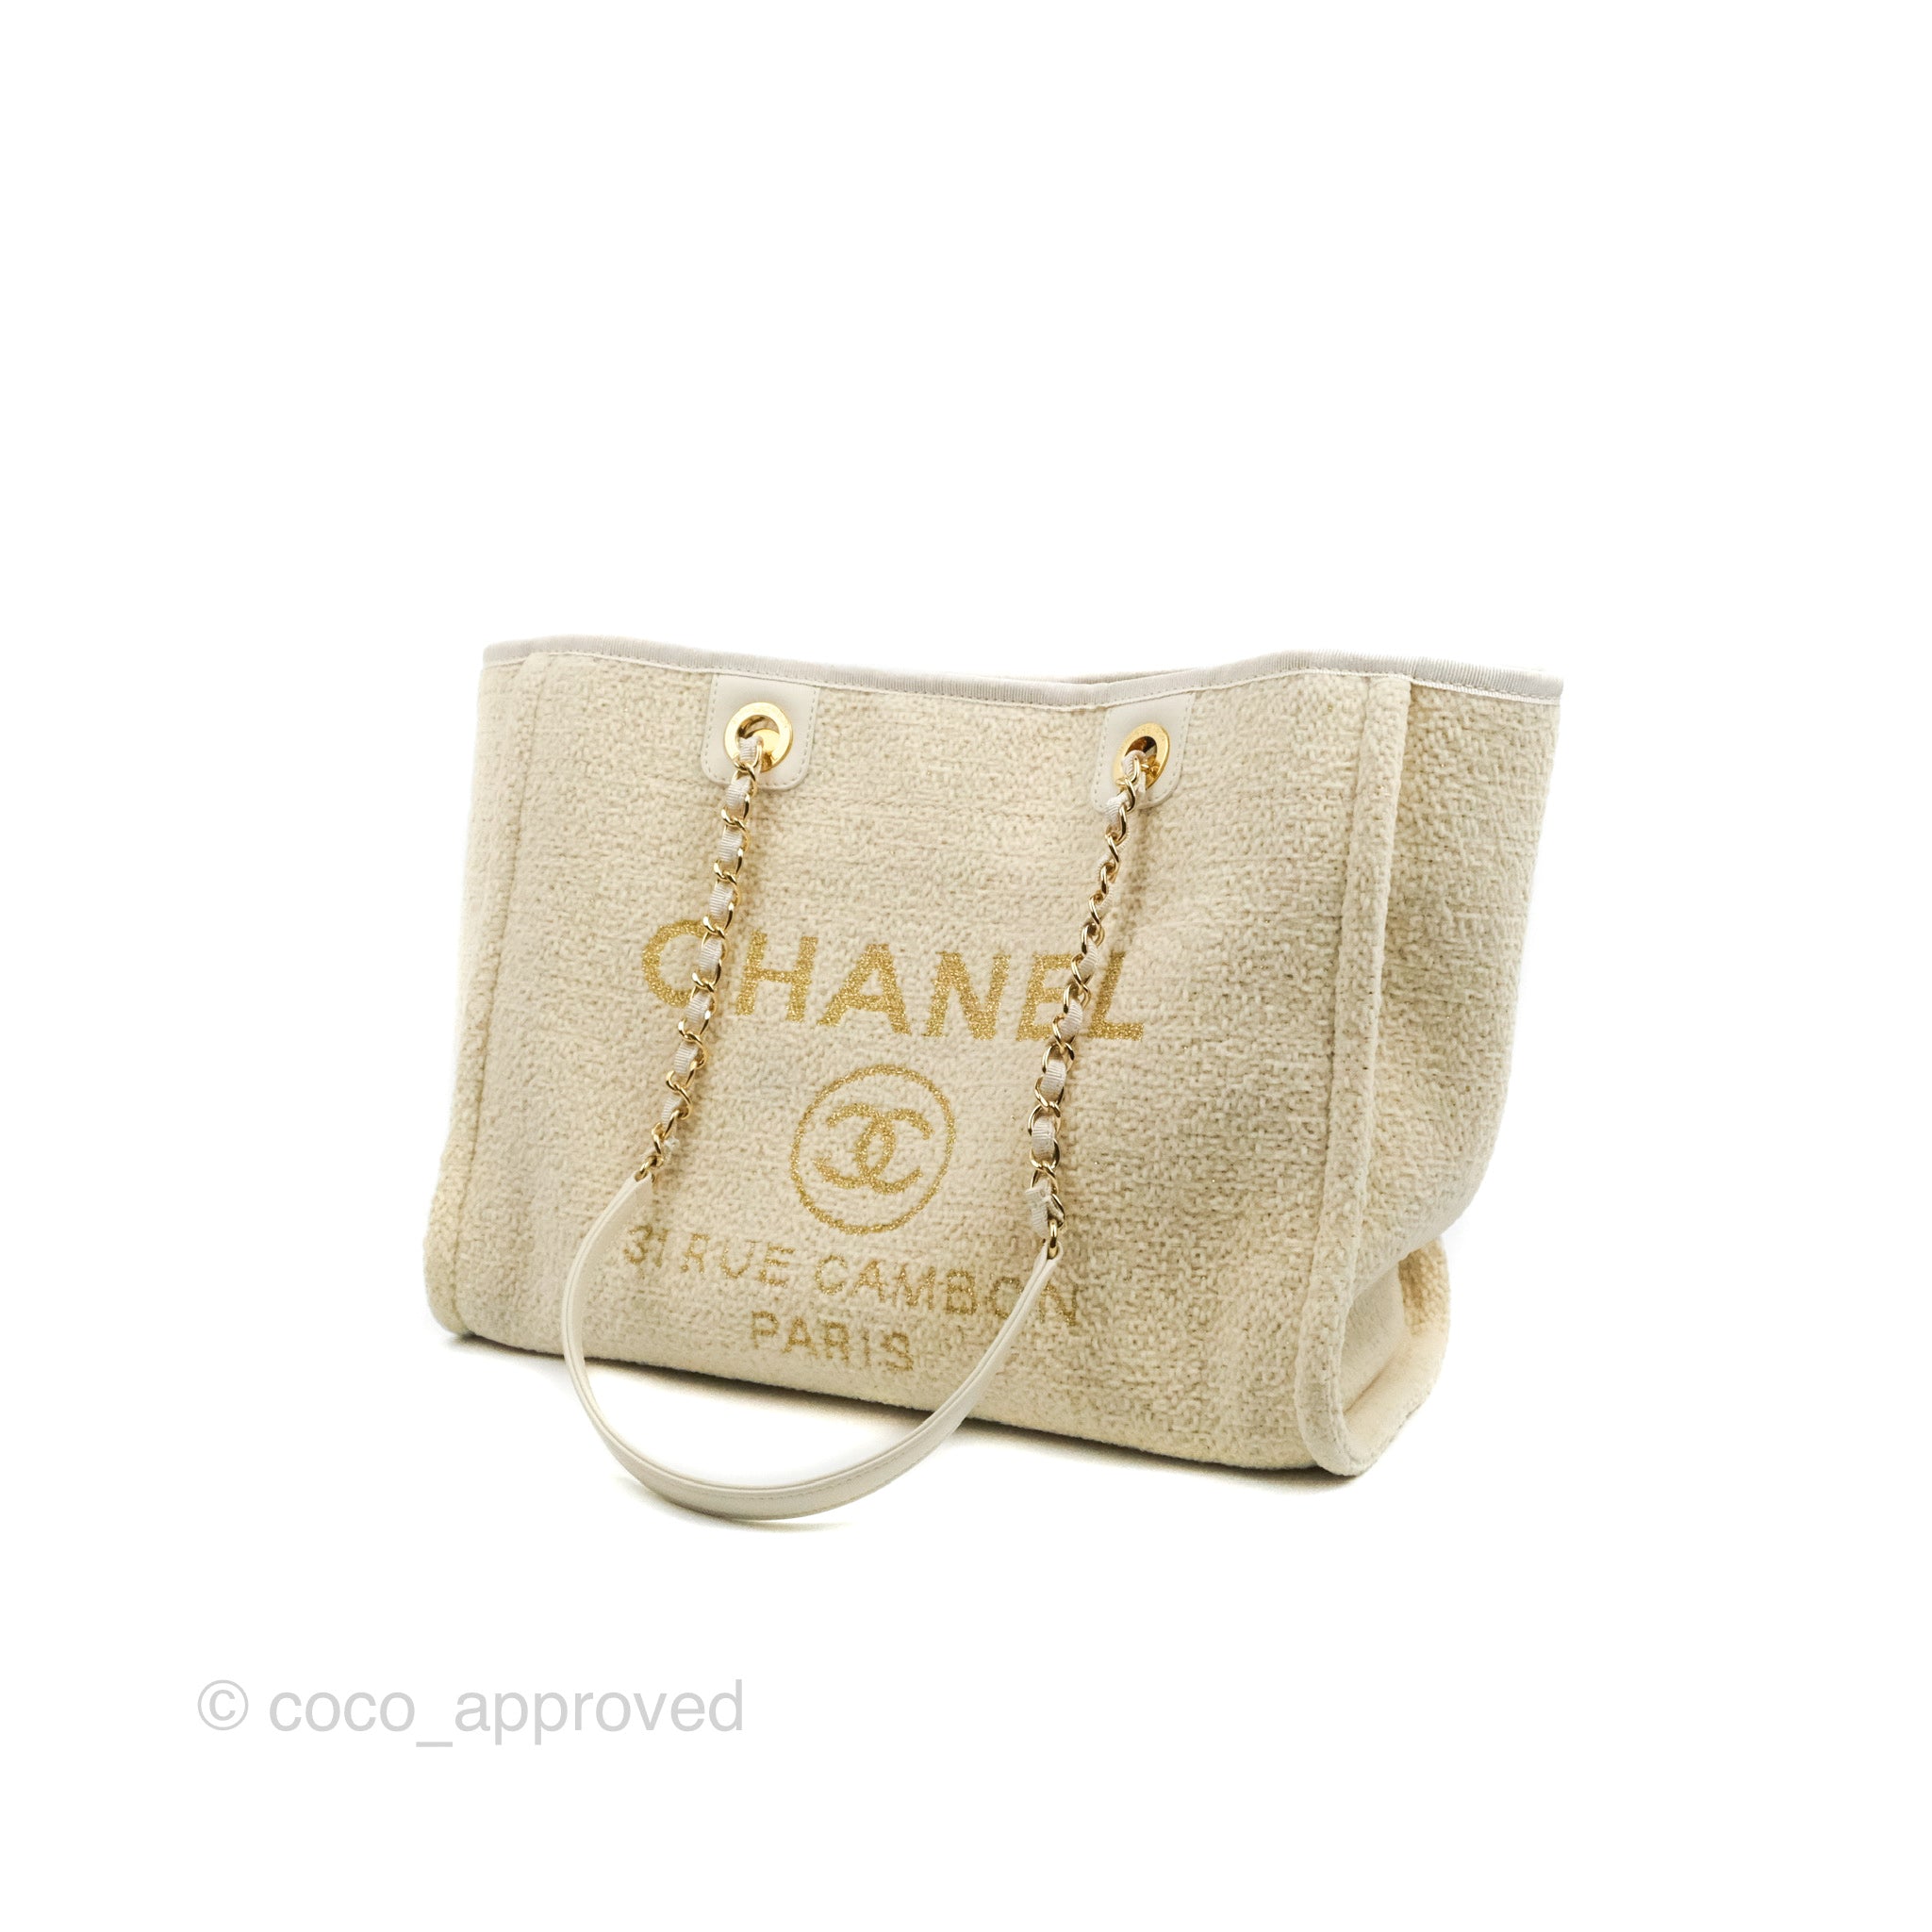 Chanel Beige Woven Straw Deauville Tote Bag with Gold Hardware